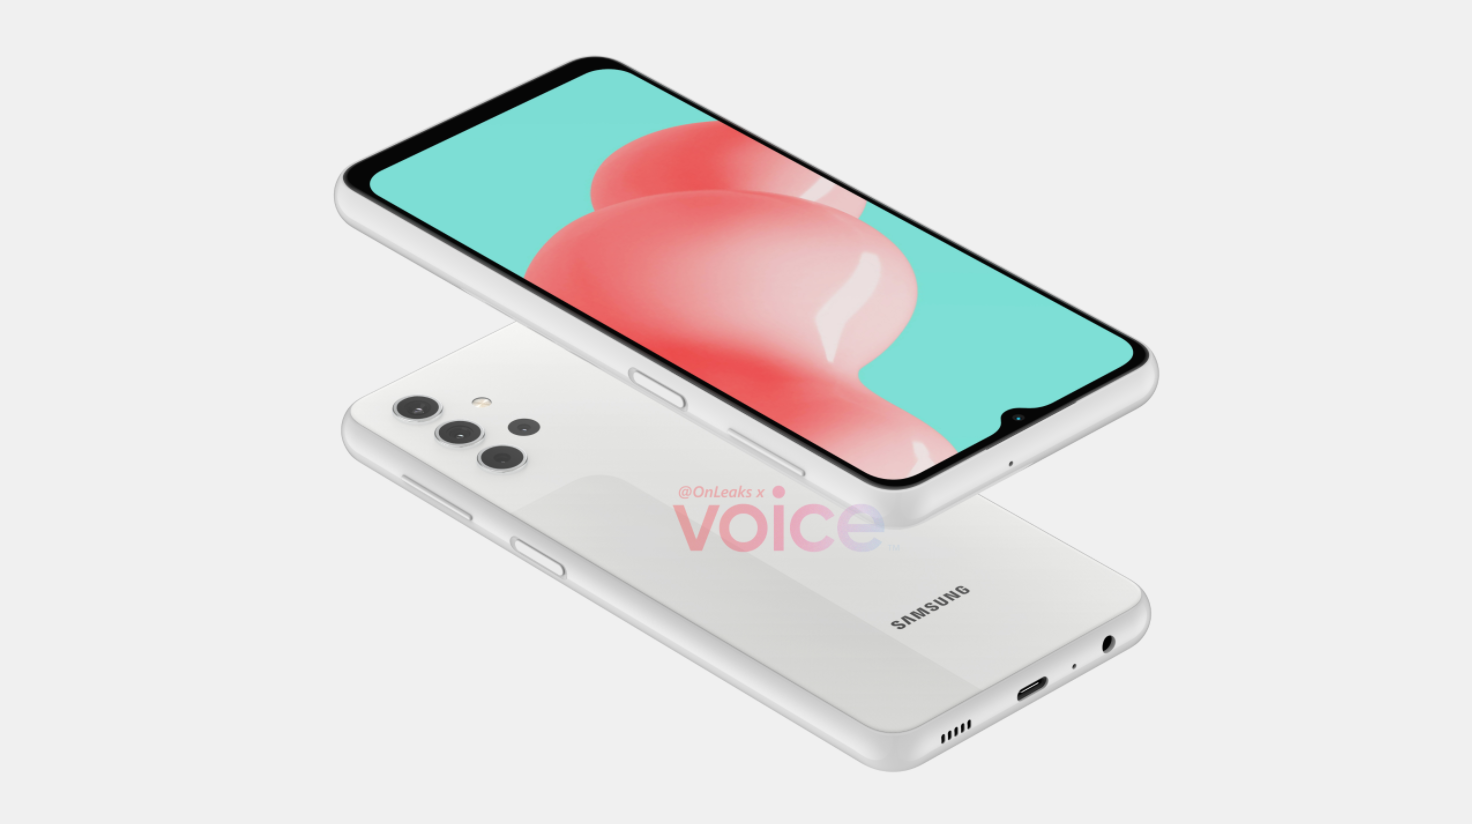 Samsung Galaxy A32 5G CAD renders emerge, could be the cheapest 5G phone from brand